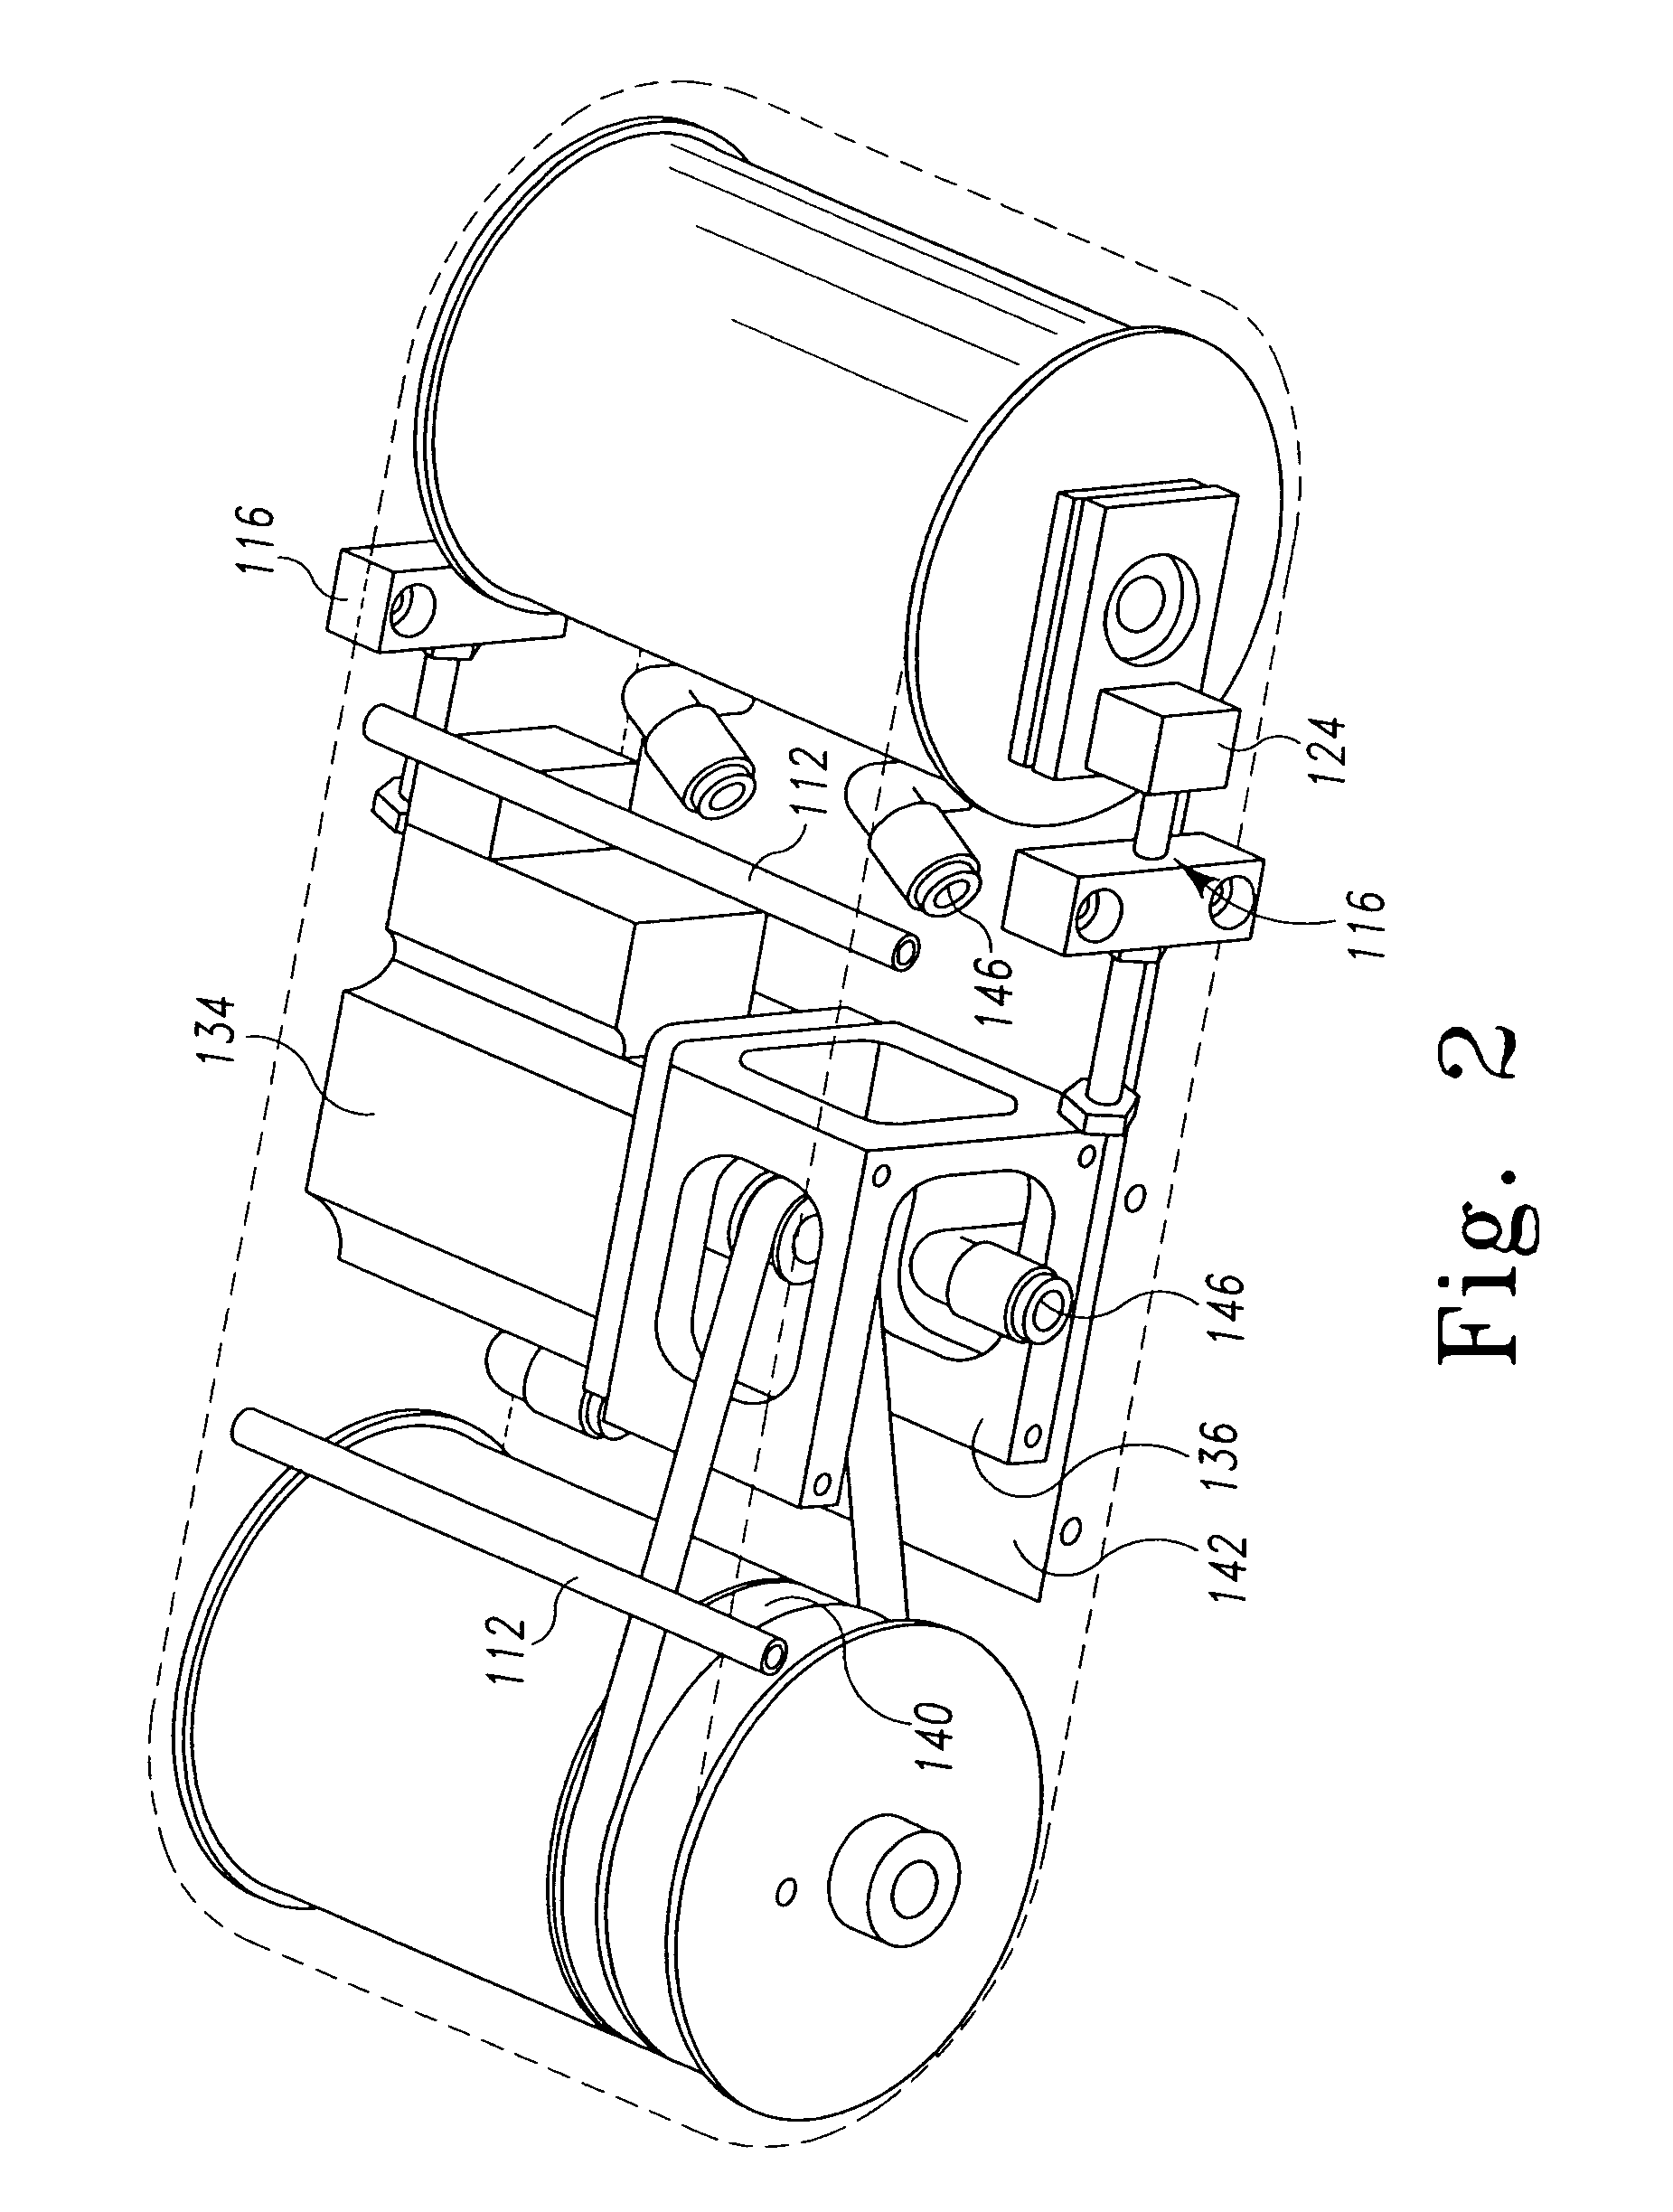 Vacuum traction device